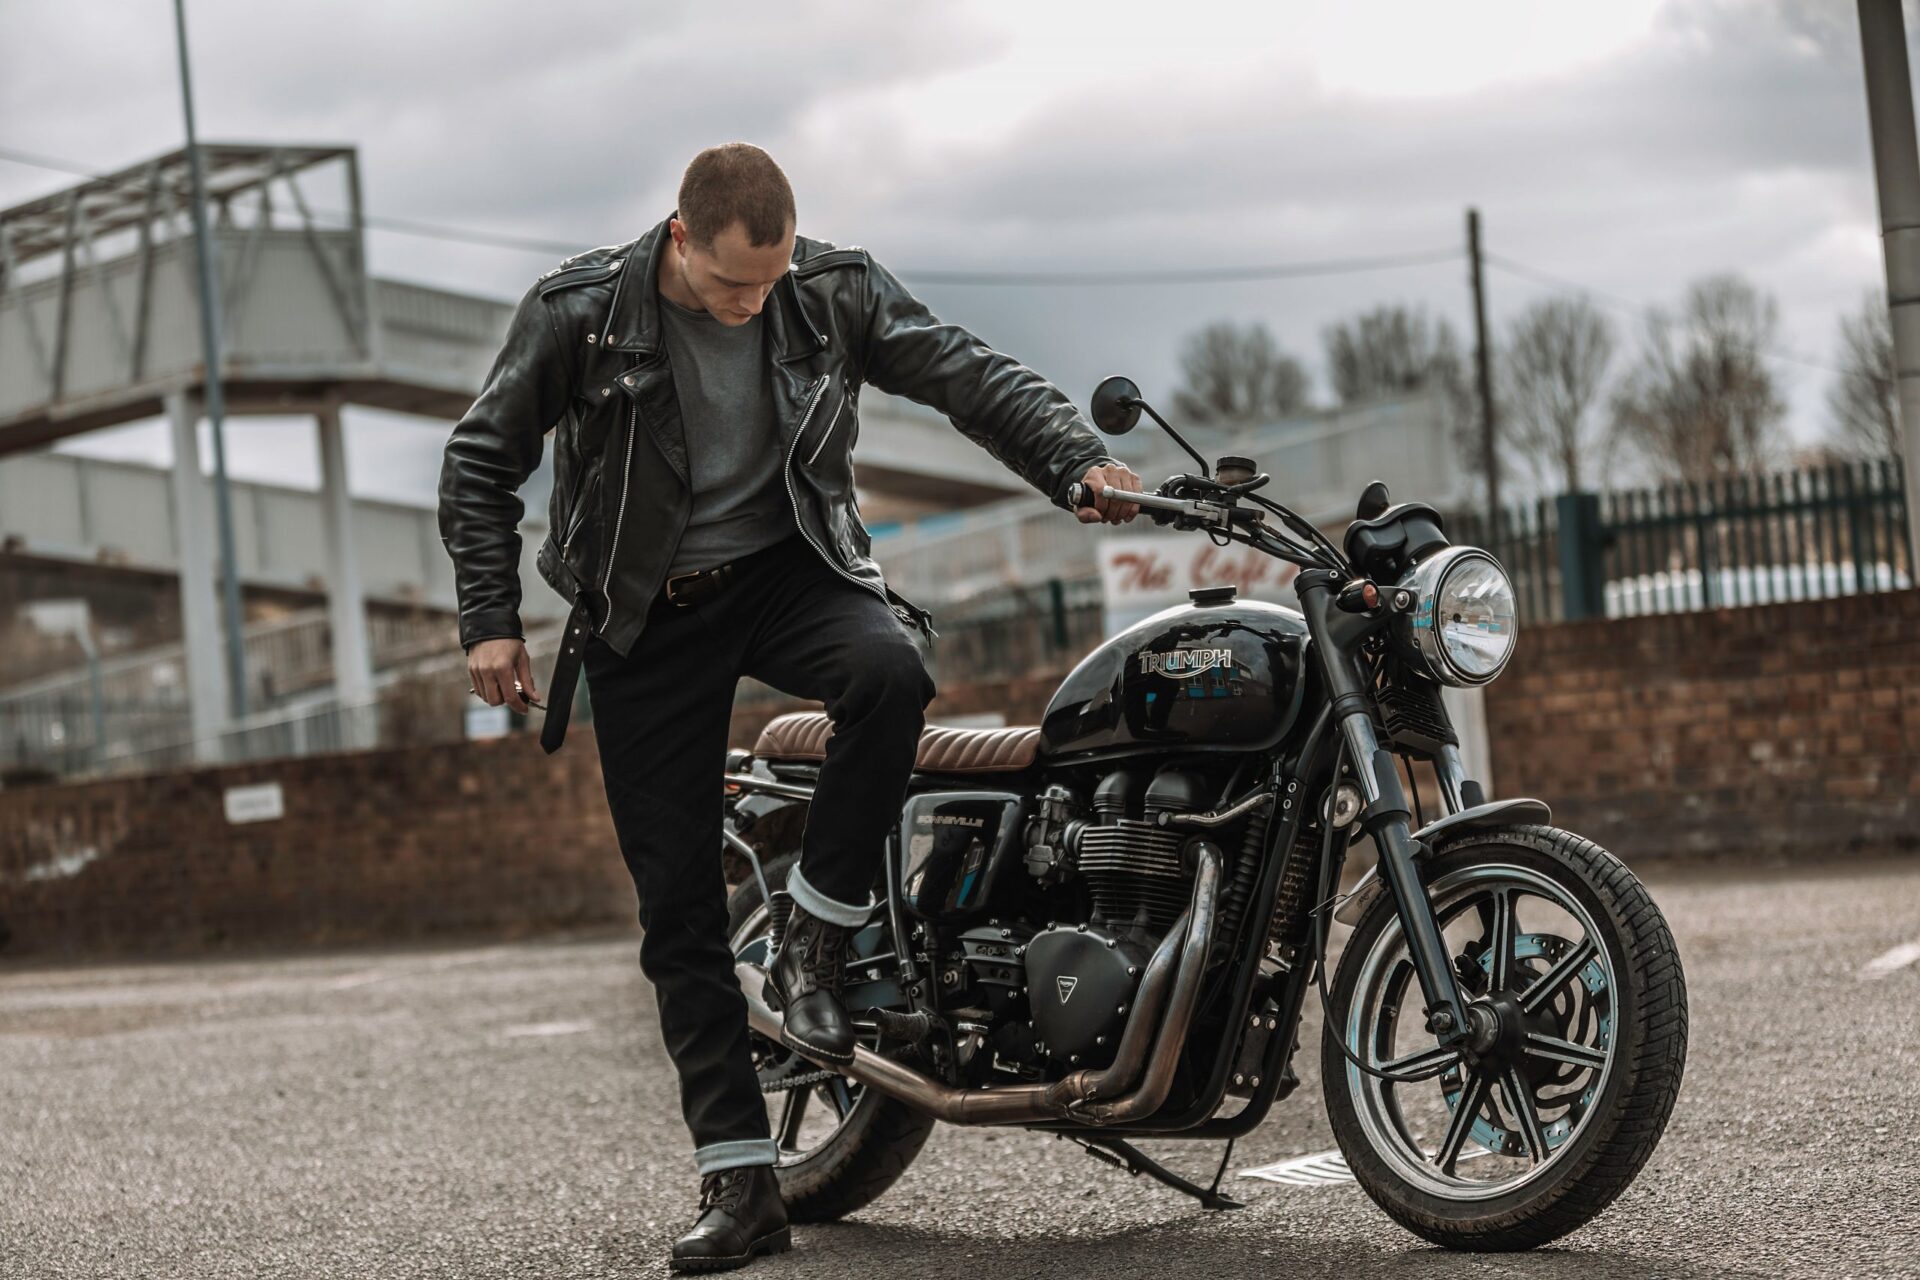 PANDO MOTO Motorcycle Wear: Does Your Motorcycle Wear Look Outdated?